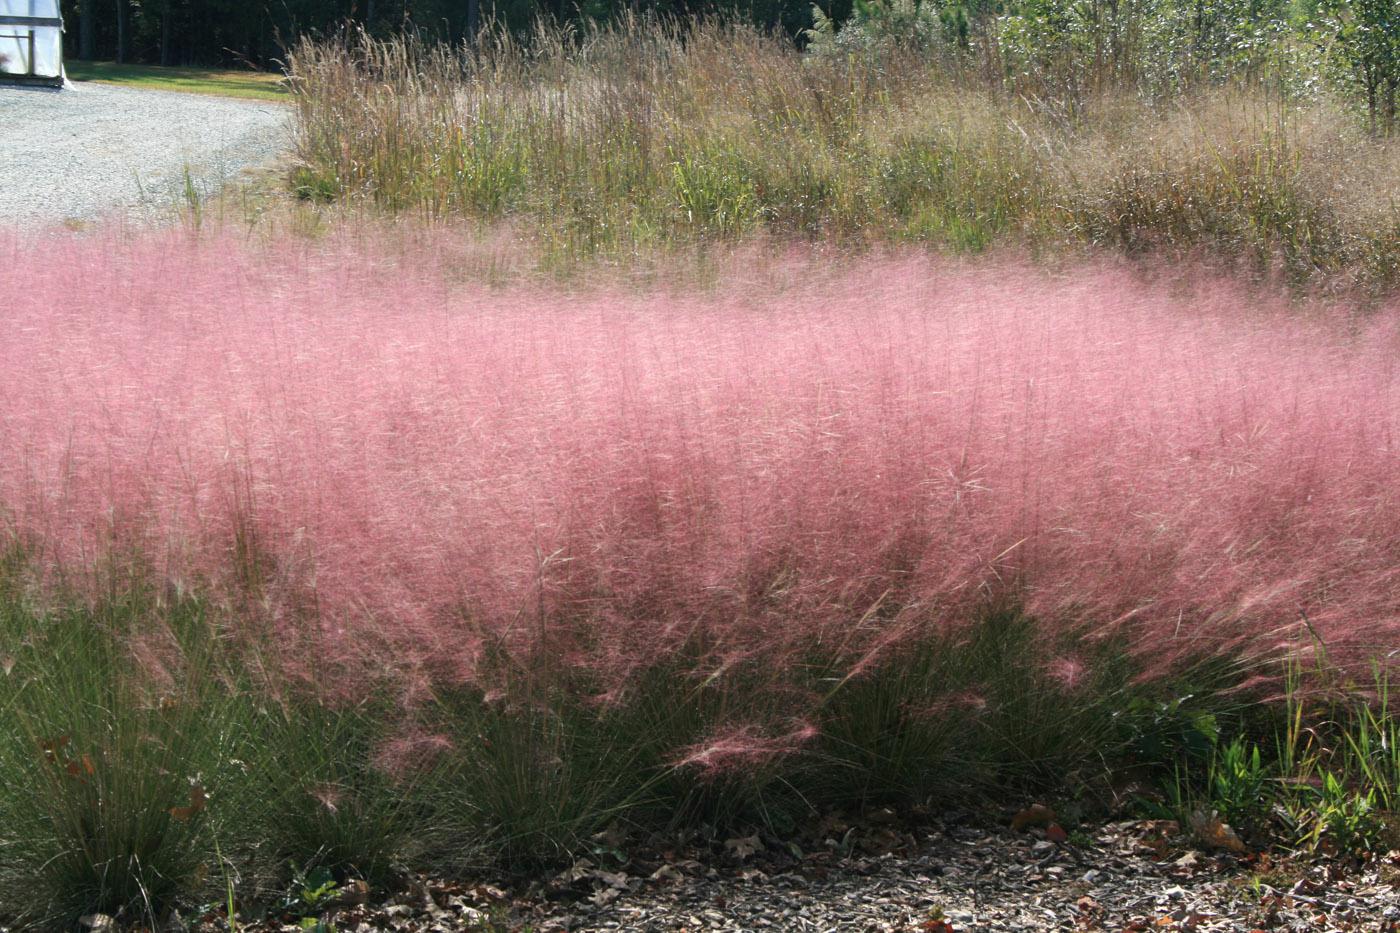 A mass planting of Gulf muhly grasses is a beautiful addition to a winter landscape. These billowy flowers resemble pink clouds. (Photo by Gary Bachman)